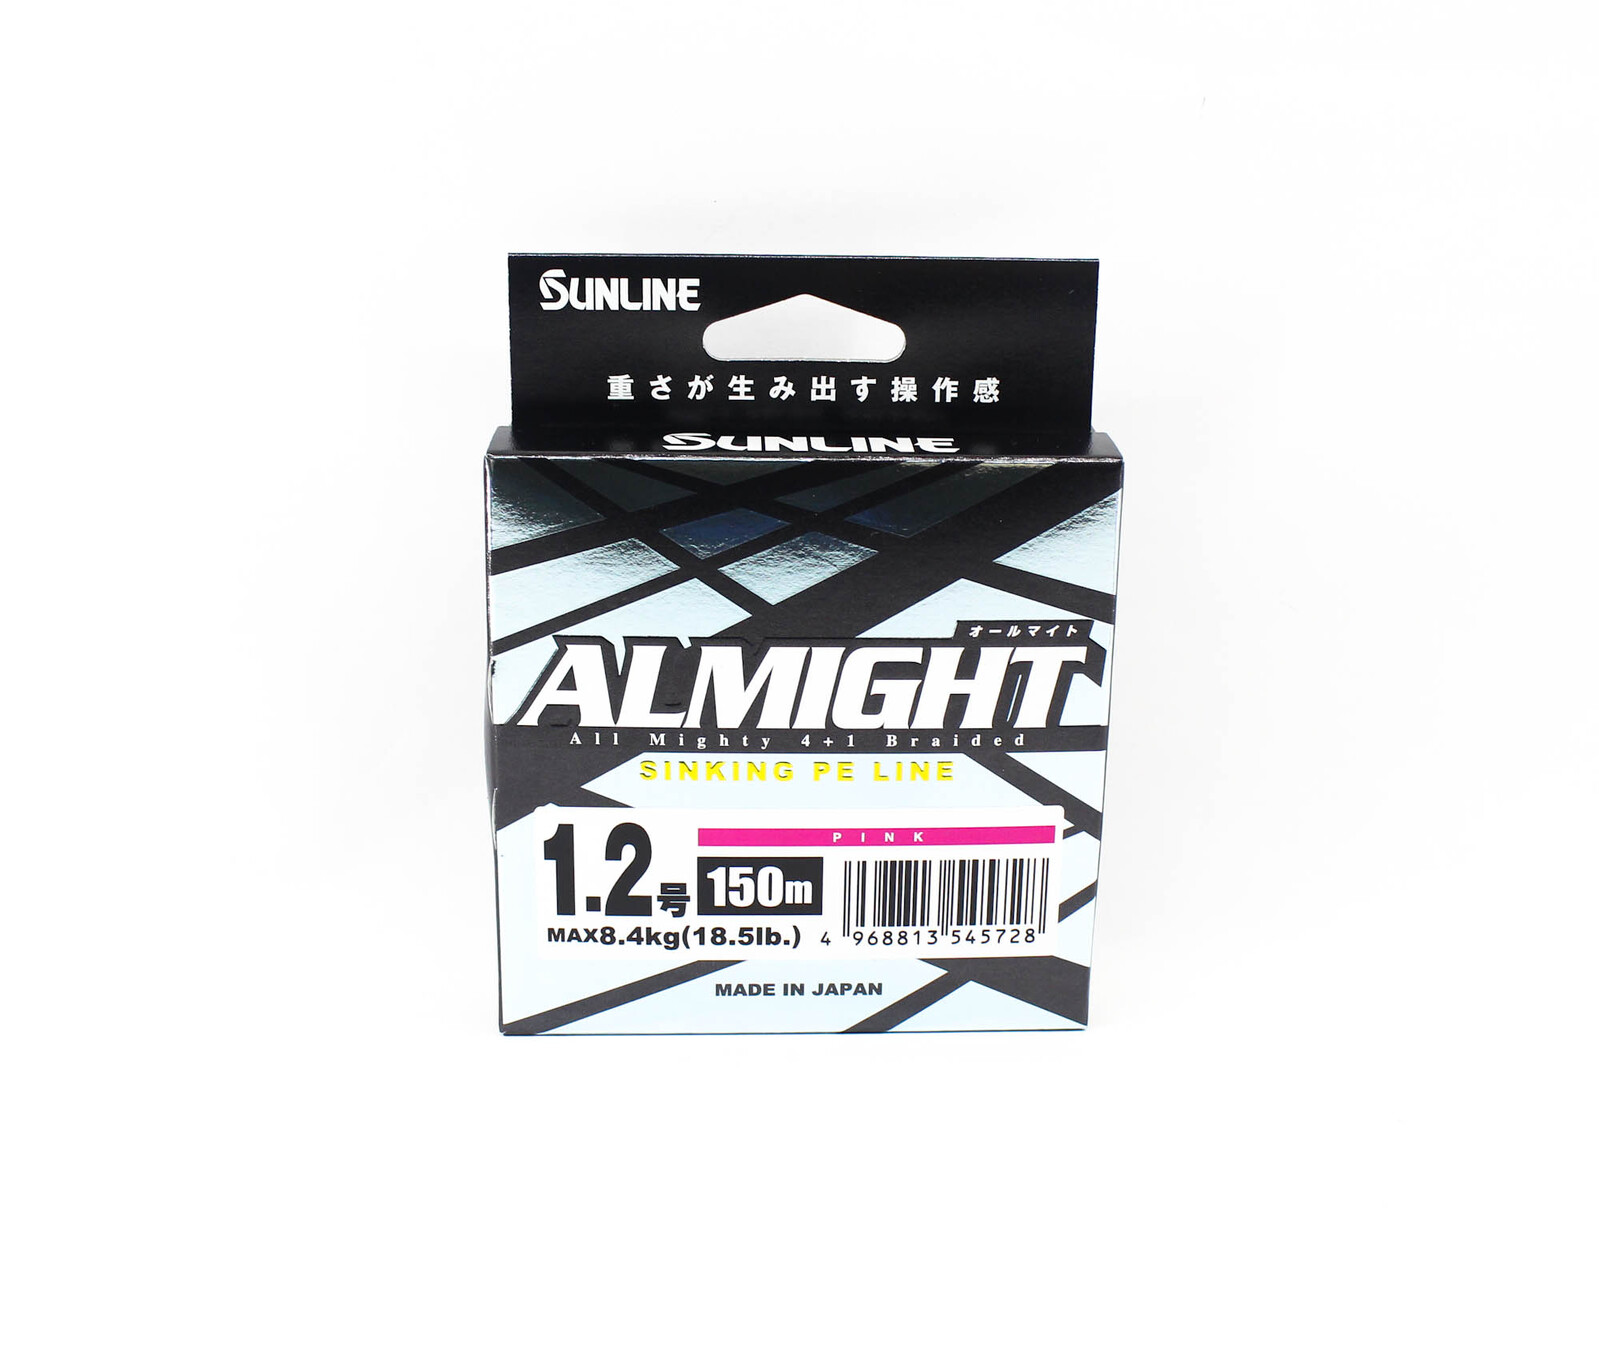 Sunline Almight x5 150m Pink Sinking Braid Fishing Line #18.5lb